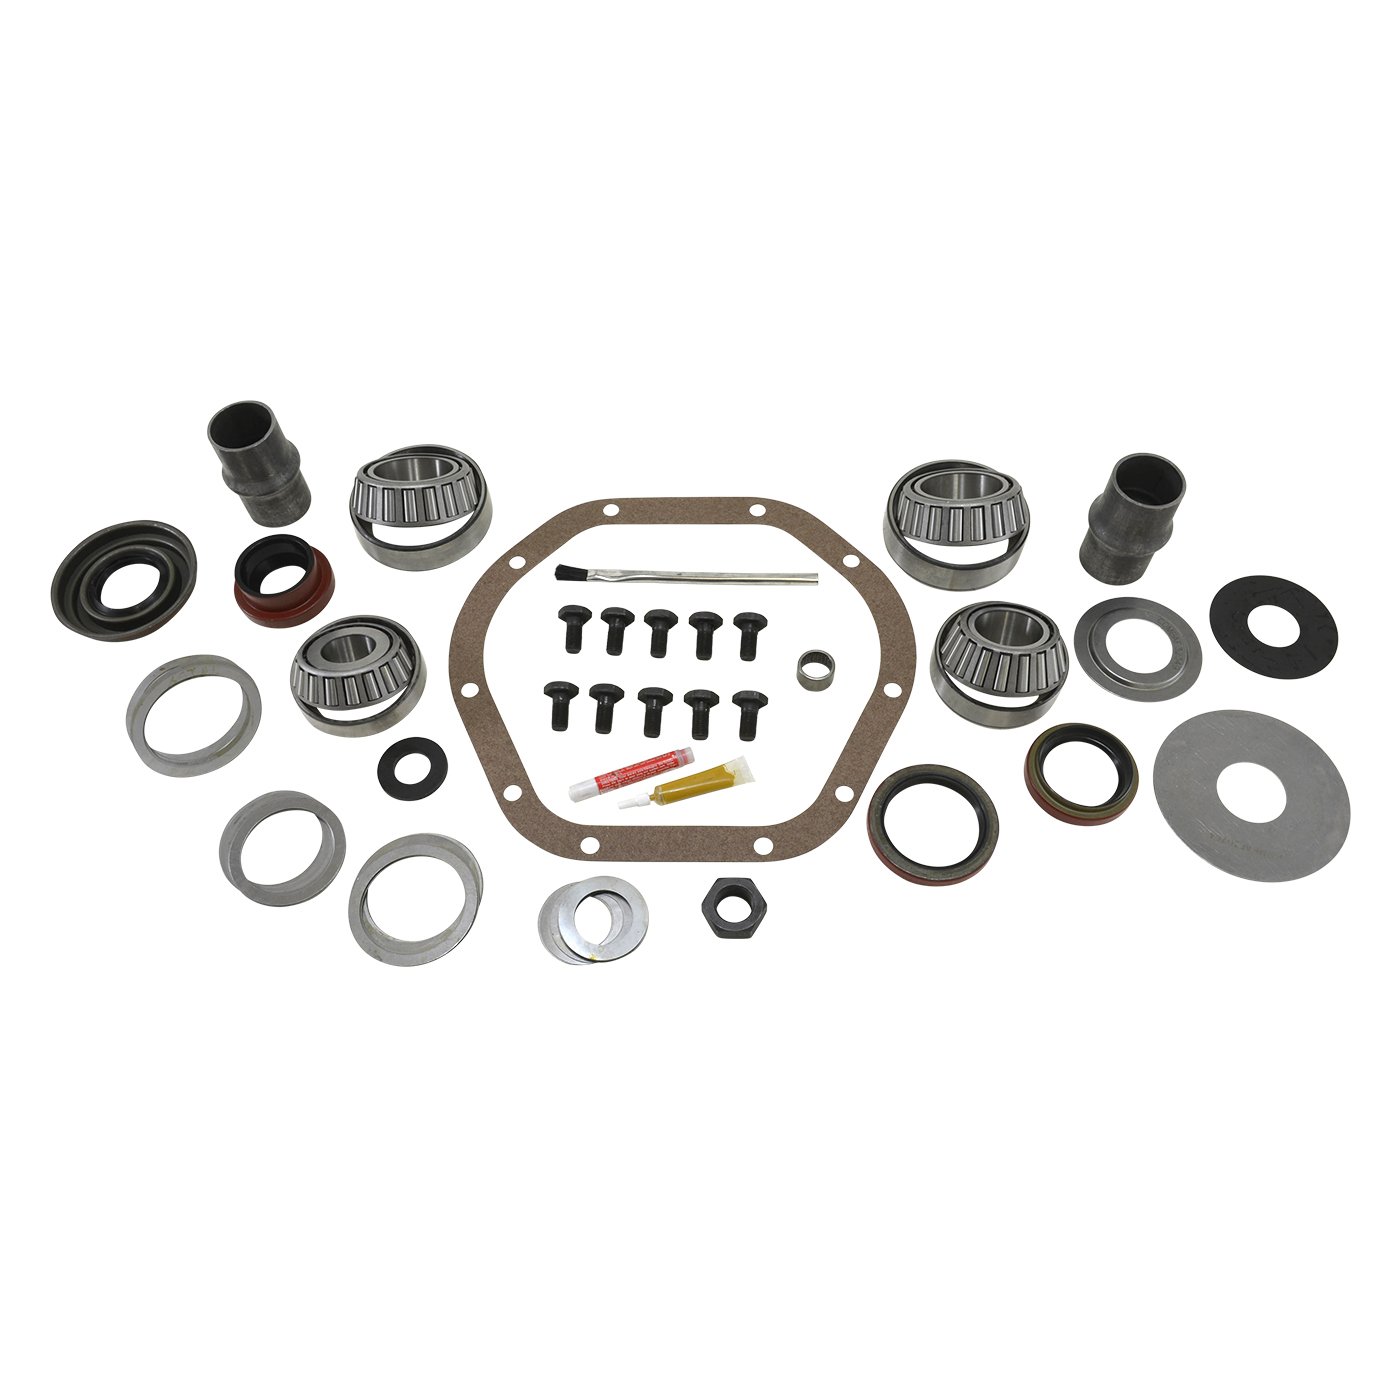 Master Overhaul Kit, Dana 44 Diff, '94-'01 Dodge W/Disconnect Front